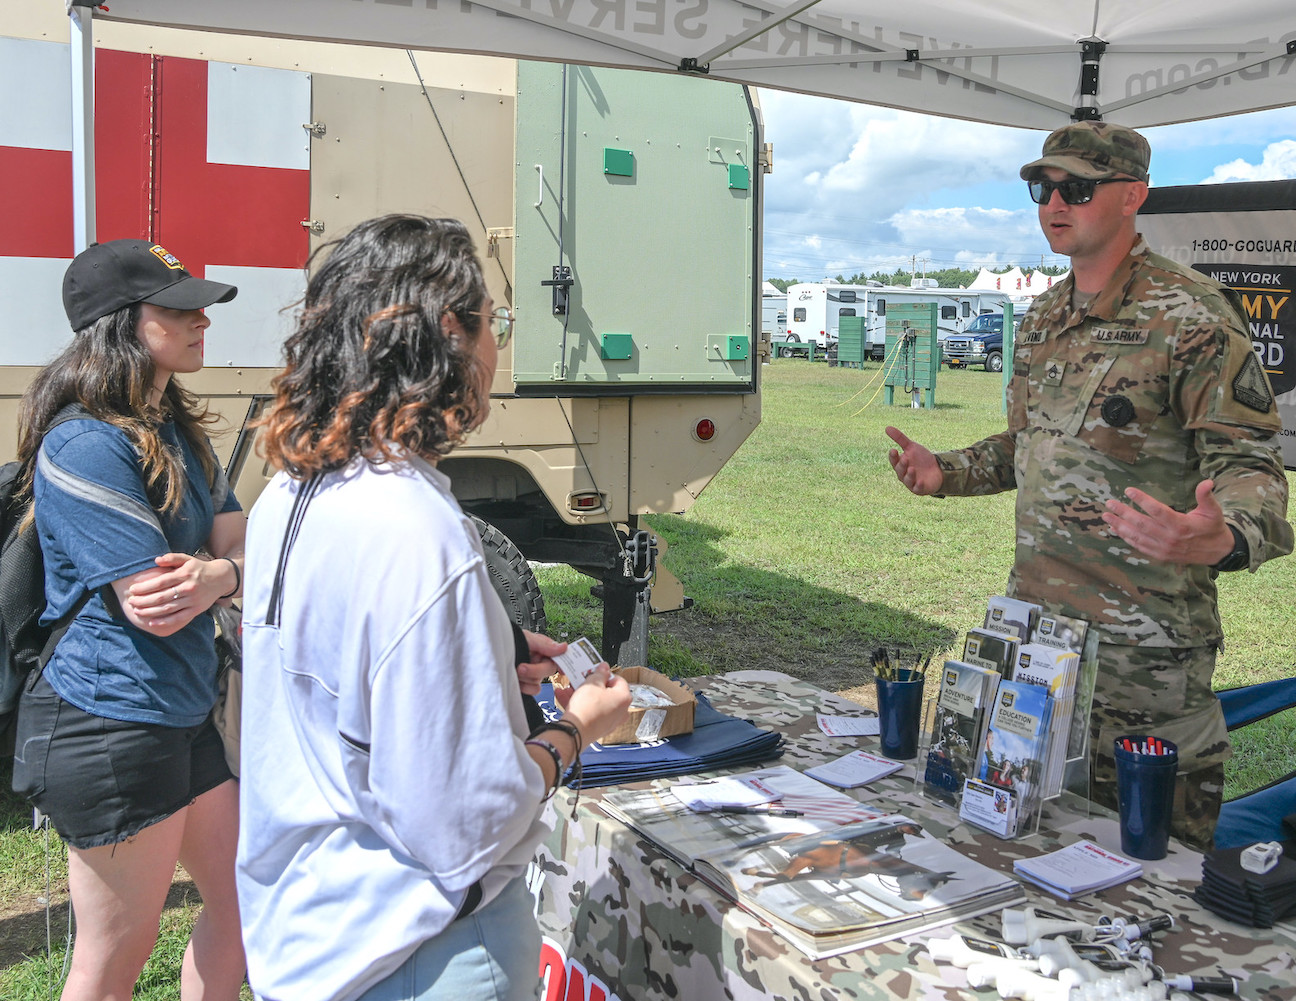 Staff Sgt. Sam Devino, a New York Army National Guard recruiter, chats with fairgoers at the Washington County Fair in Greenwich on Aug. 28. (Submitted photo)